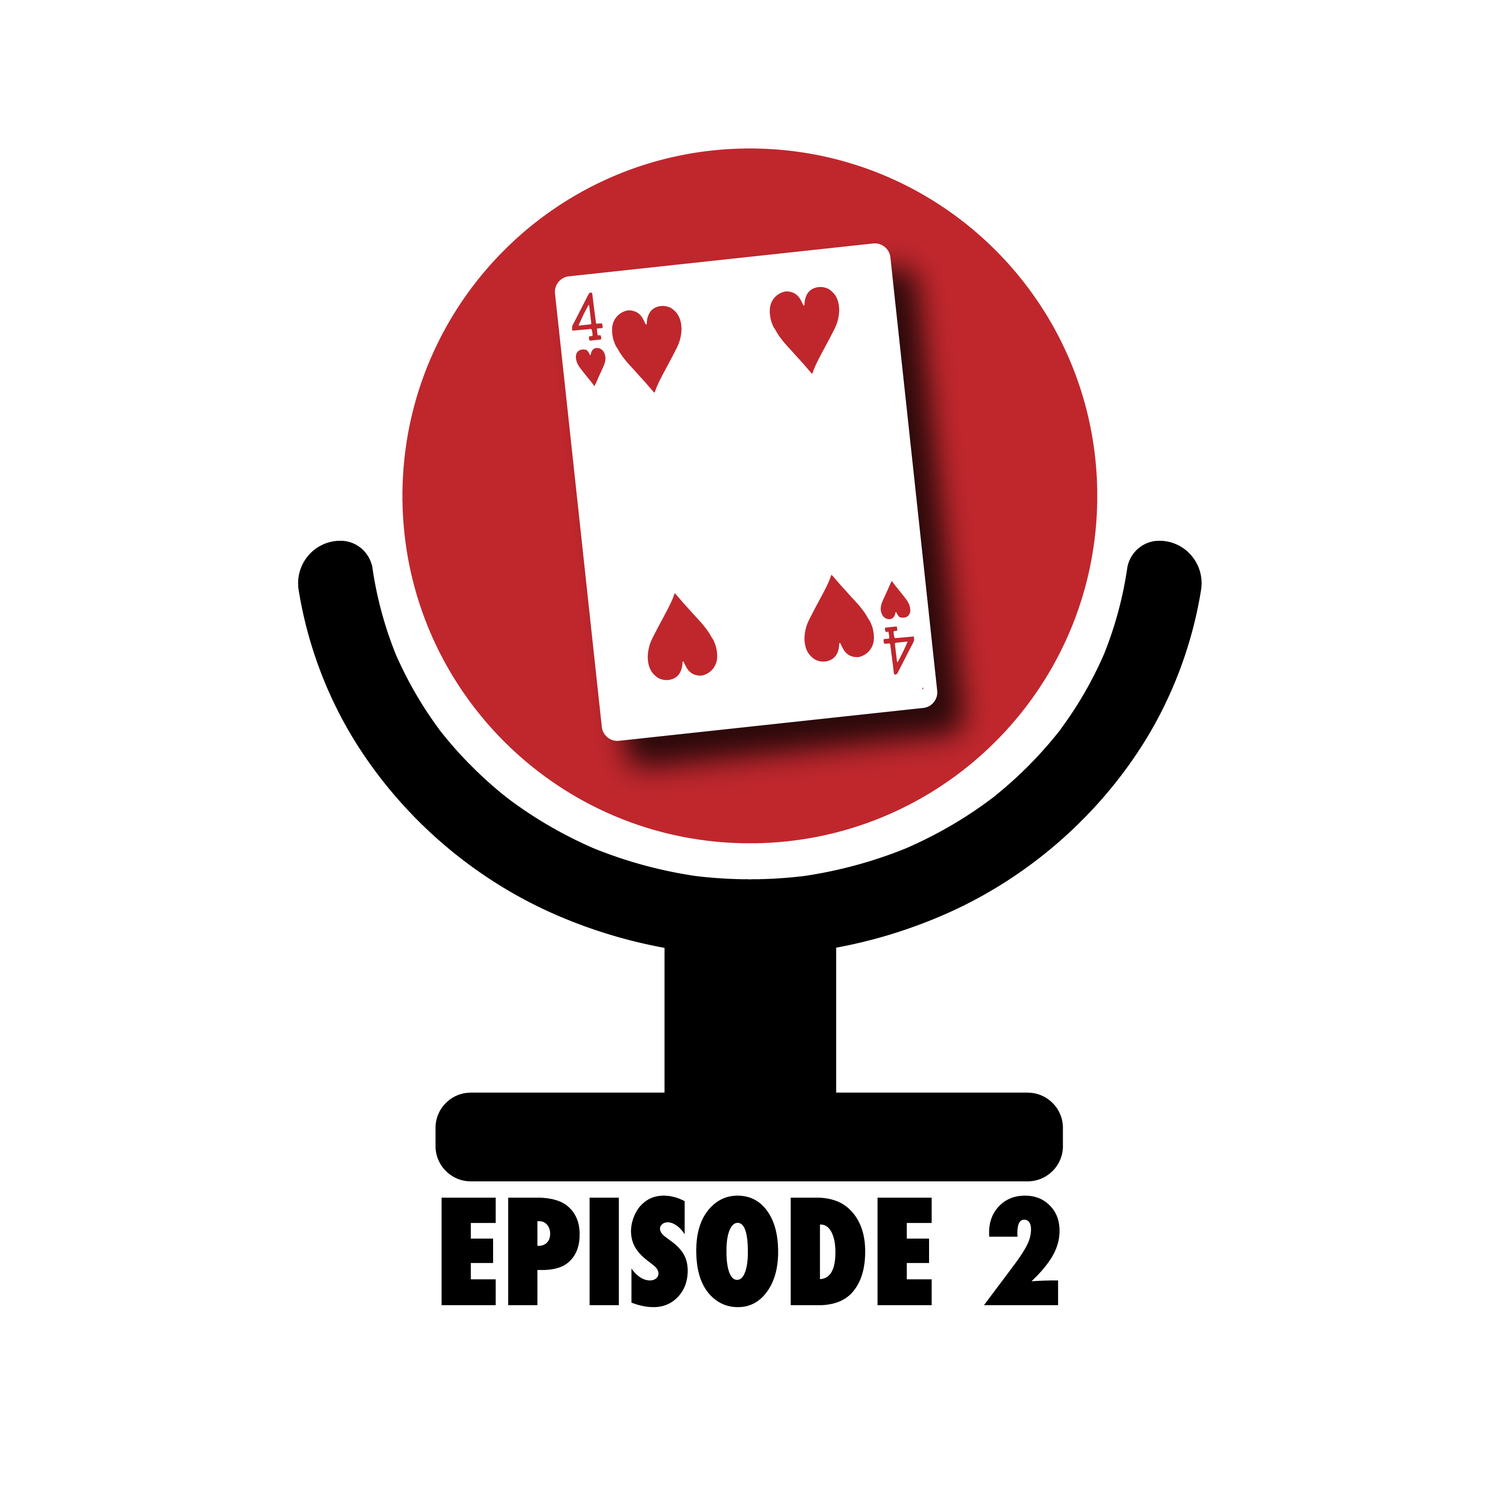 Episode 2 - Six of Hearts